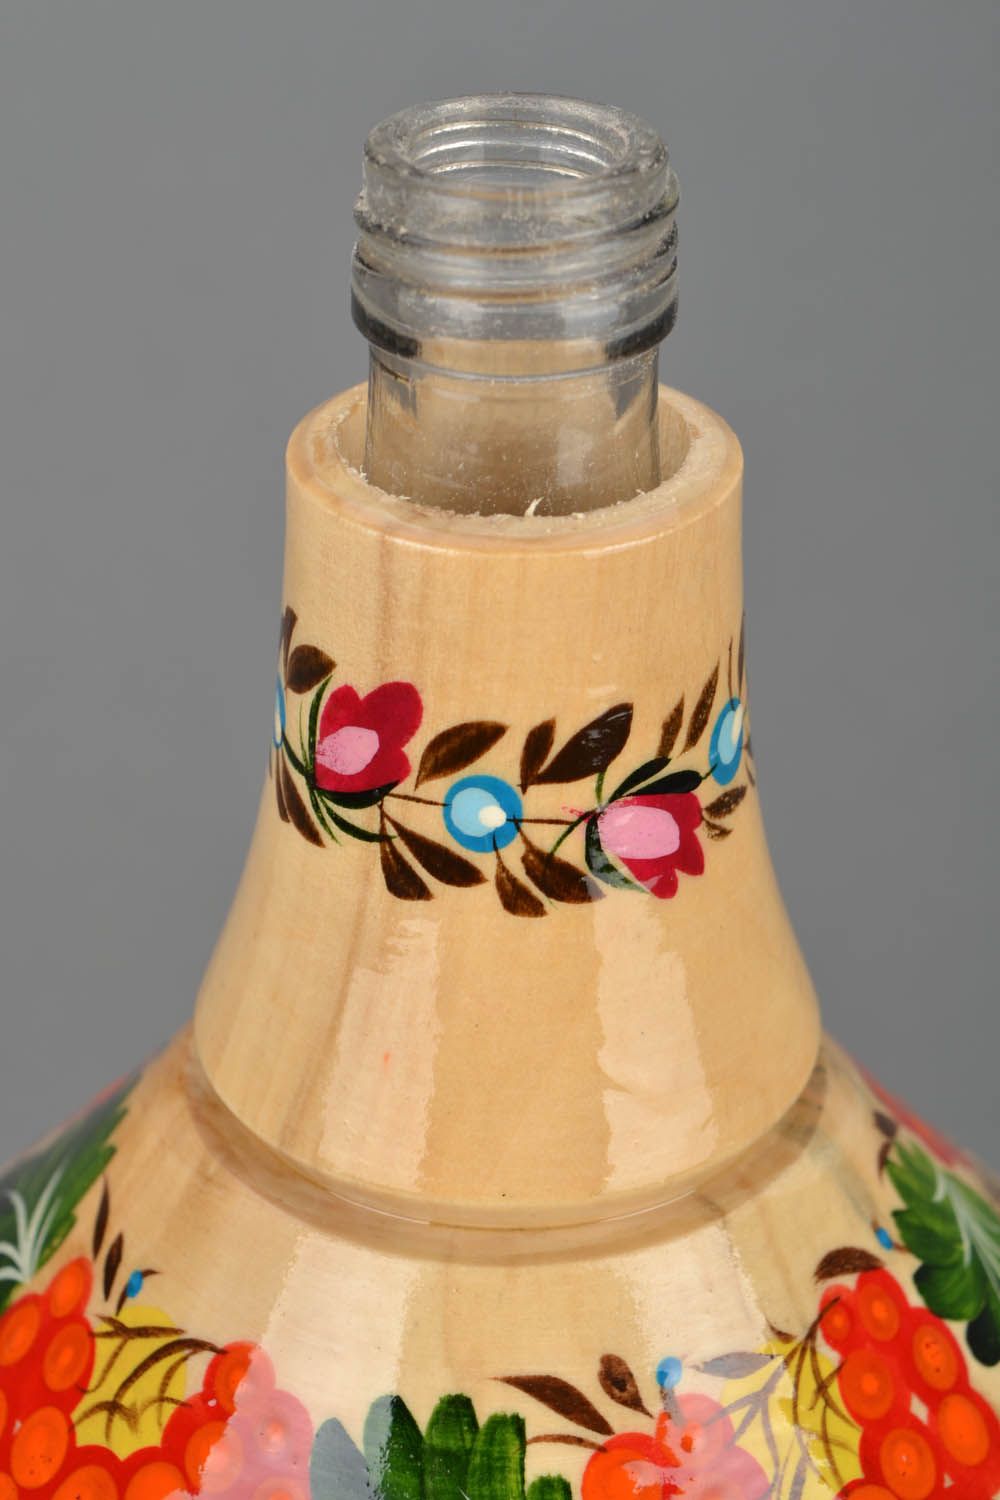 Homemade painted wooden bottle photo 2